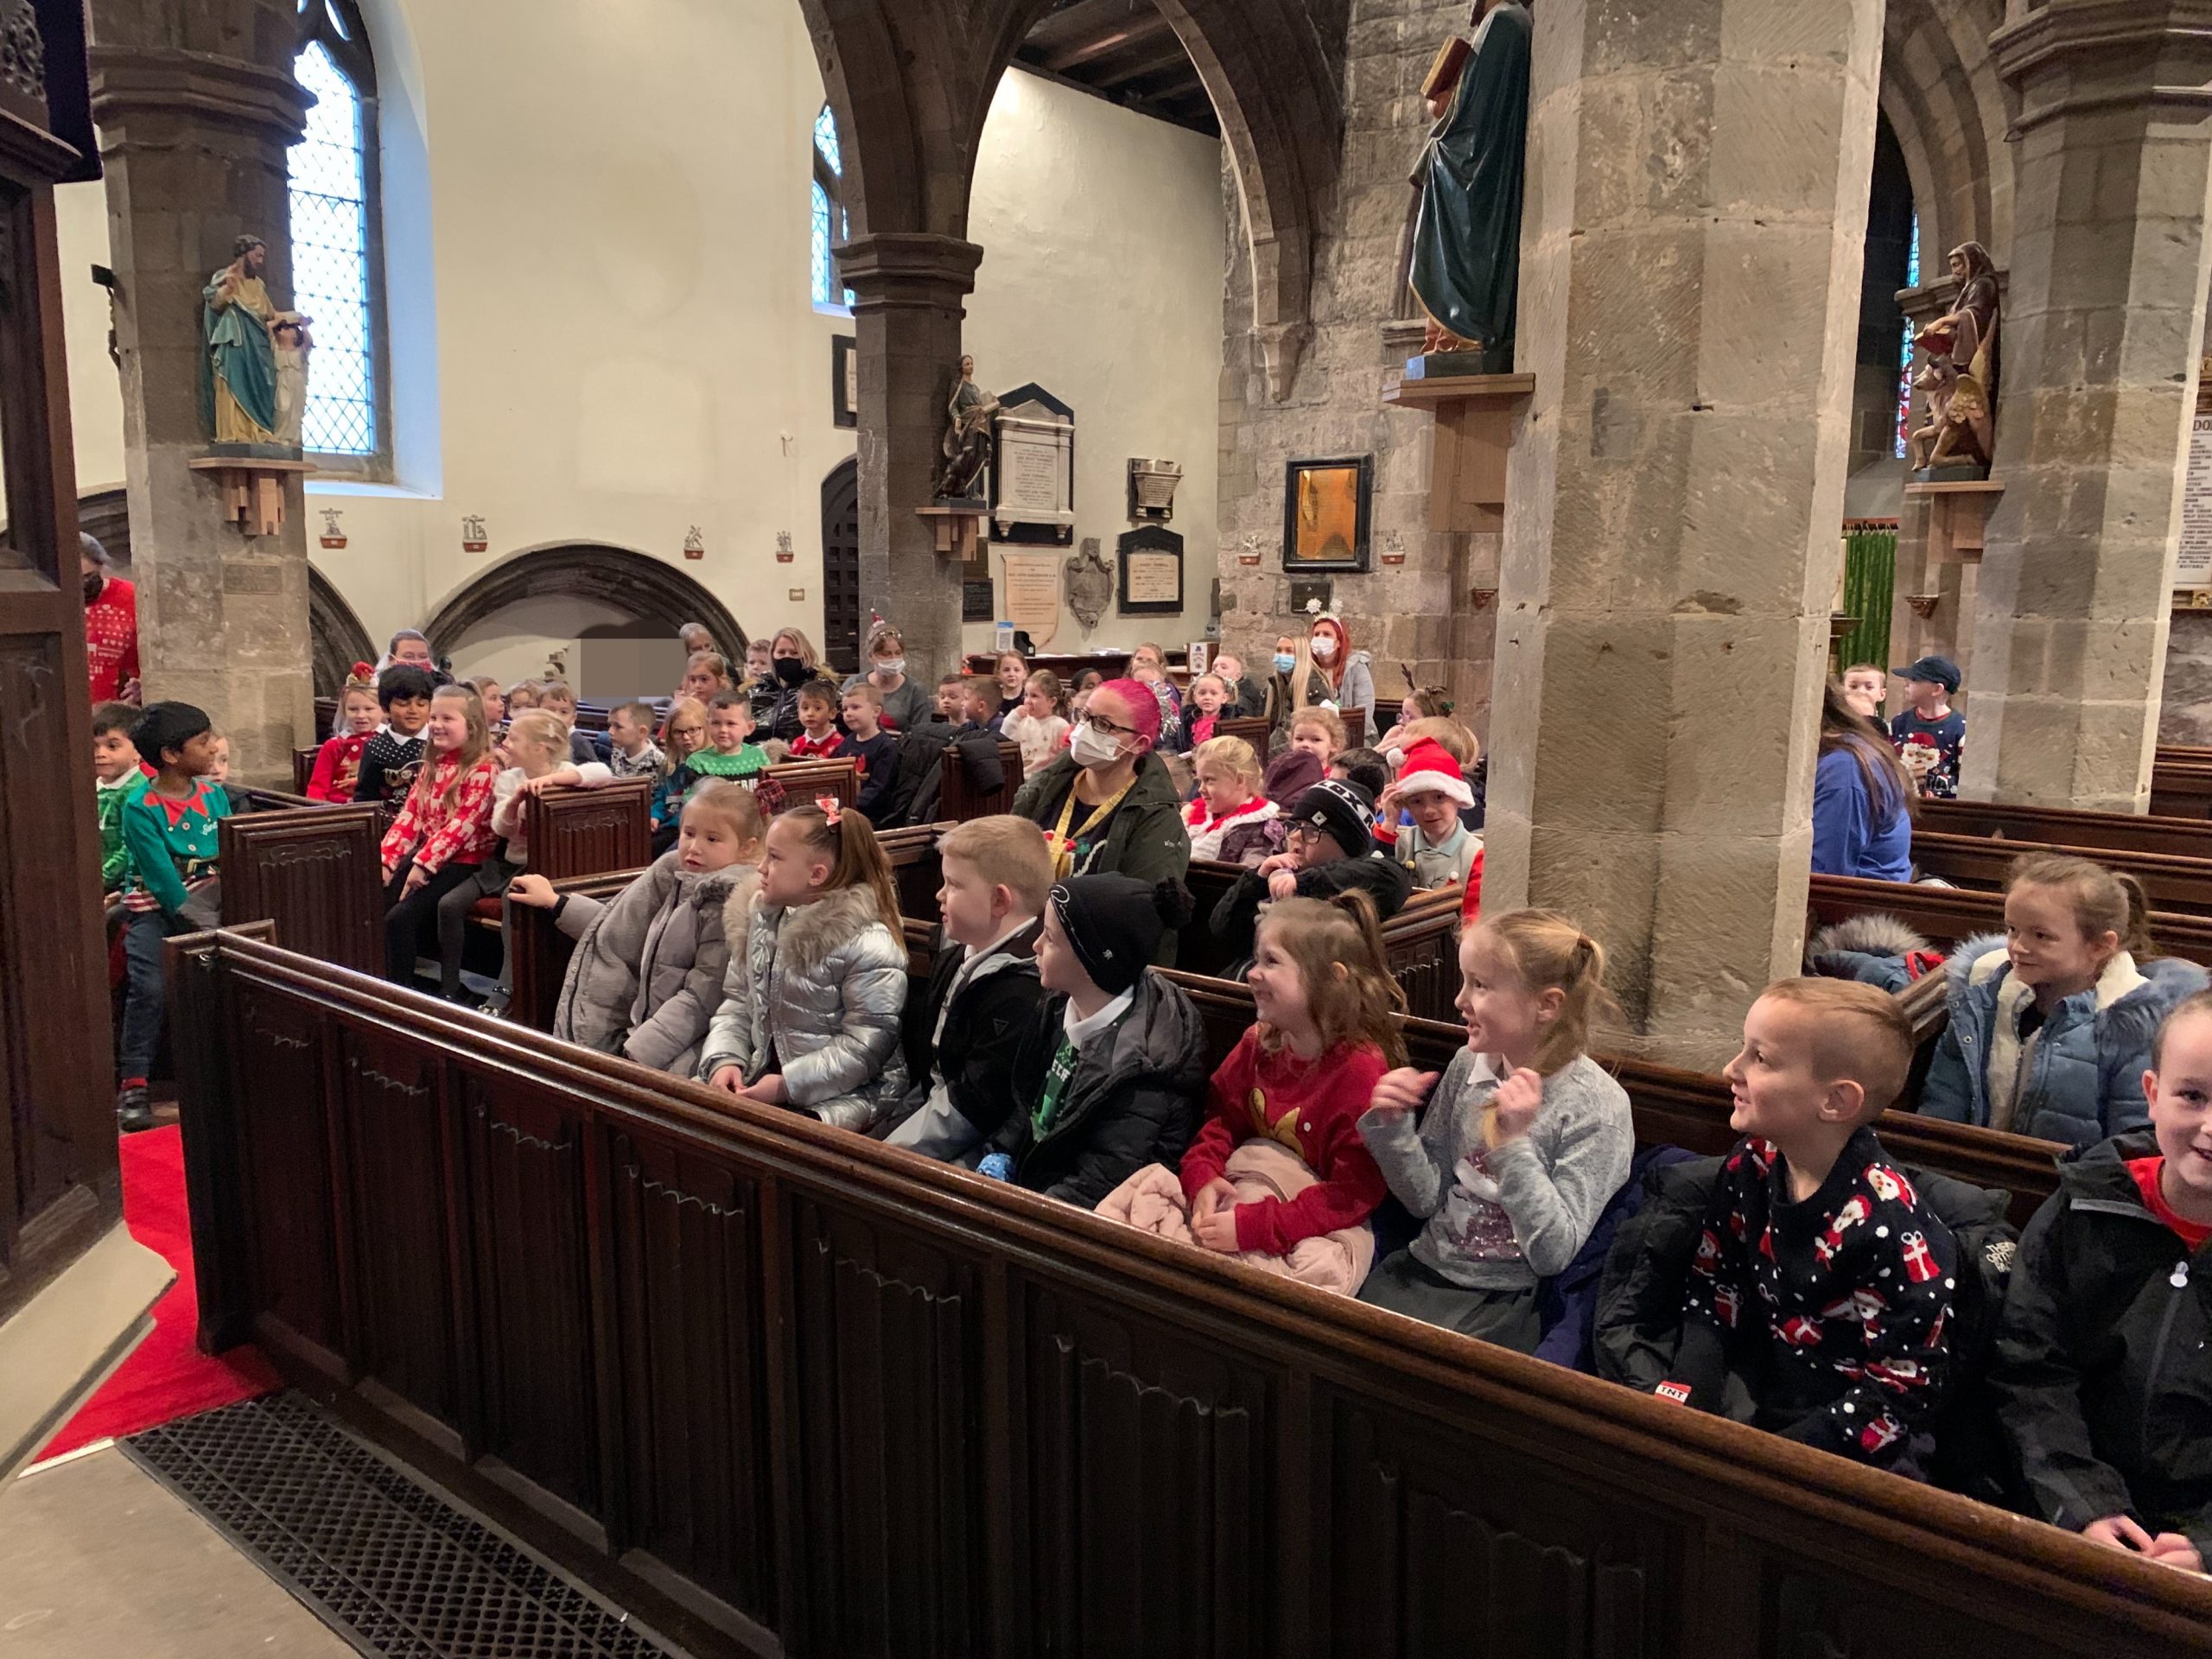 KS1 children and adults listening to Rev Paul in the church